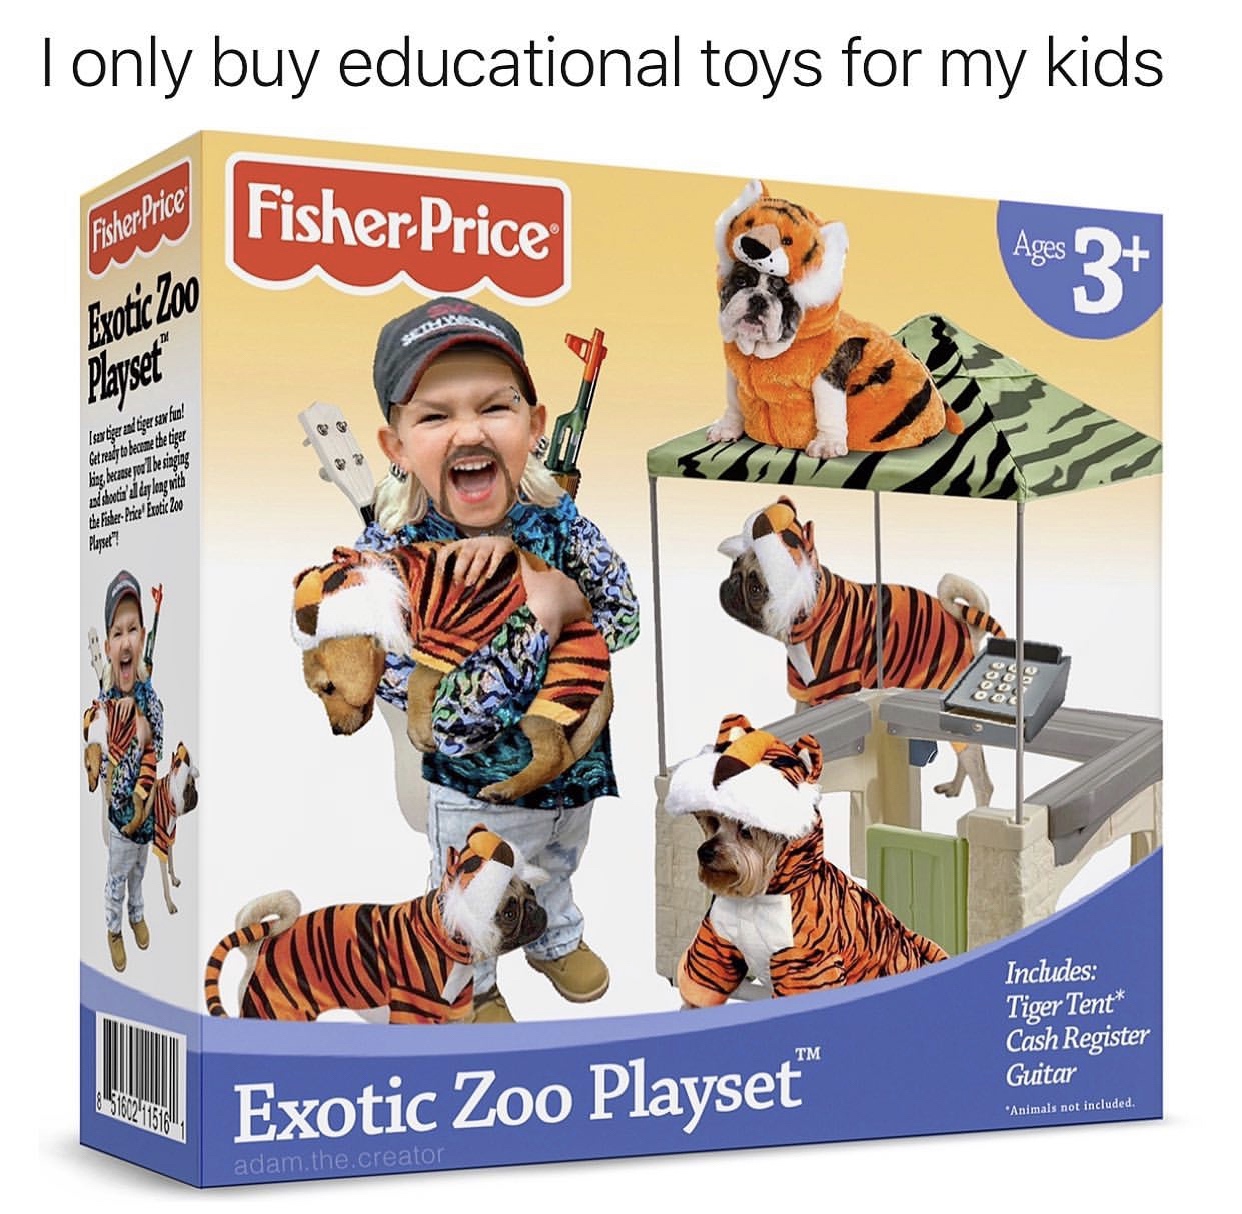 fisher price - Tonly buy educational toys for my kids Fisher Price Fisher Price Ages Exotic Zoo Playset" I ser tiger and tiger sex fun! Get ready to become the tiger bing because you be singing a shoota' di day long with the FisherPrice' Erotic 200 Ayse? 